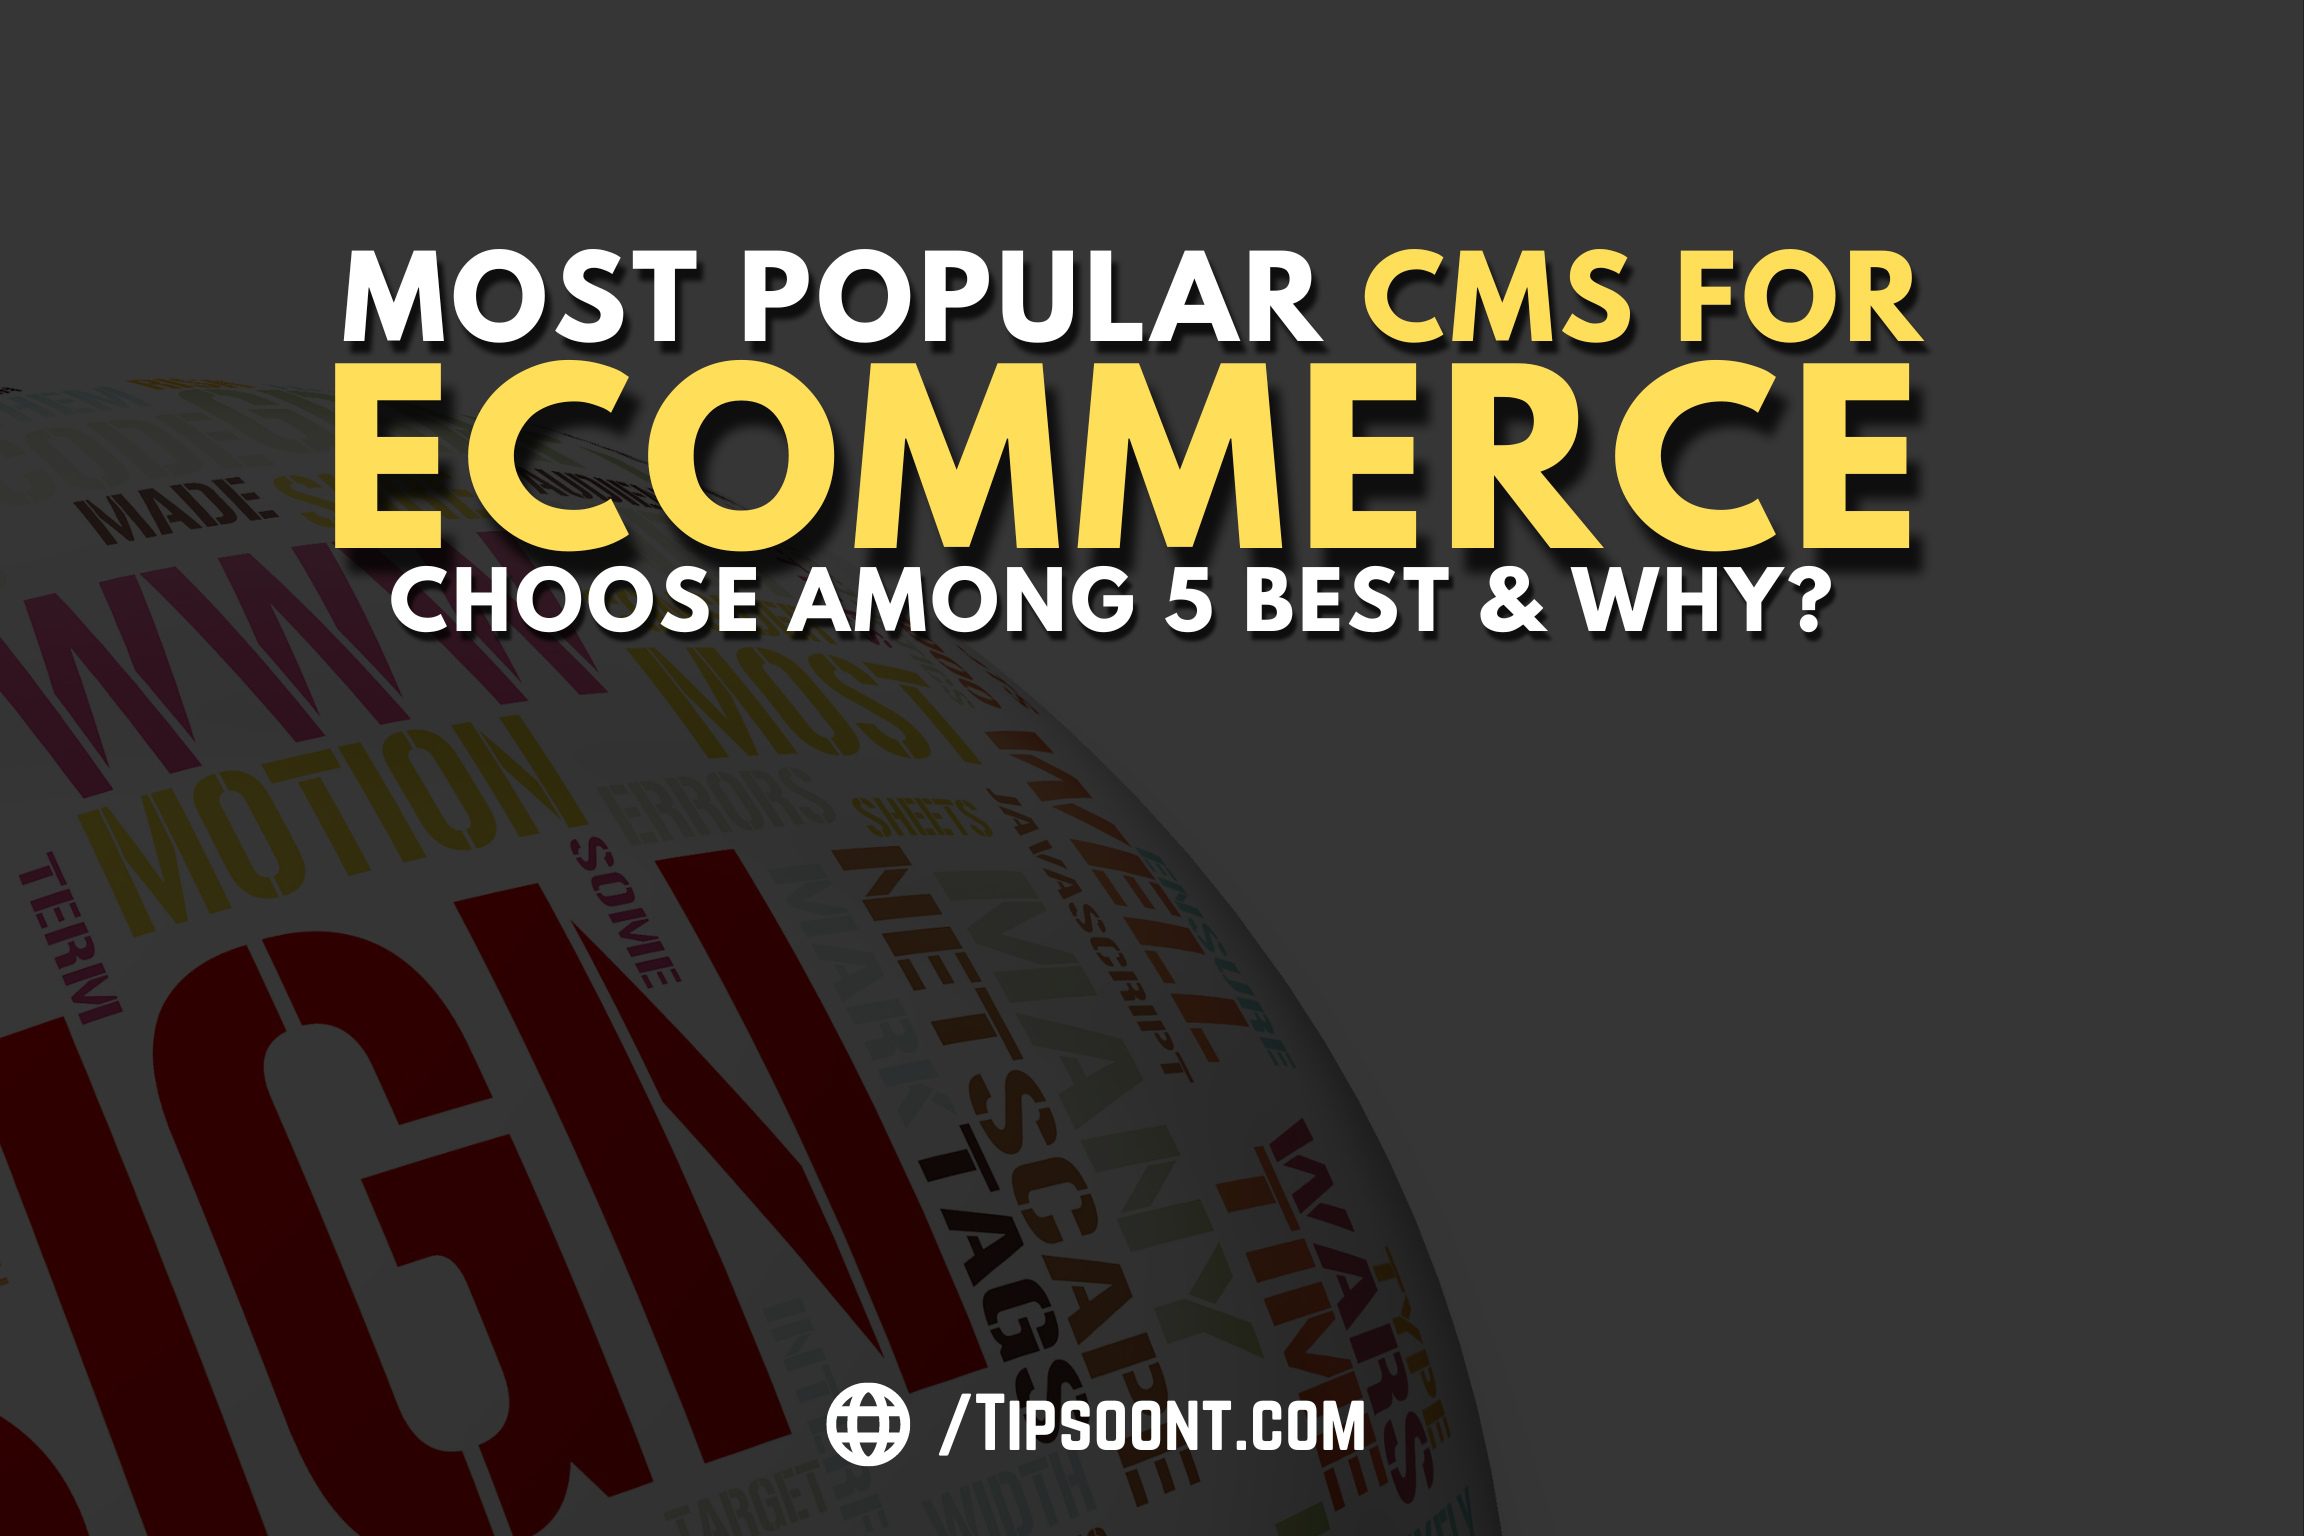 Most Popular CMS for Among 5 Best & Why?